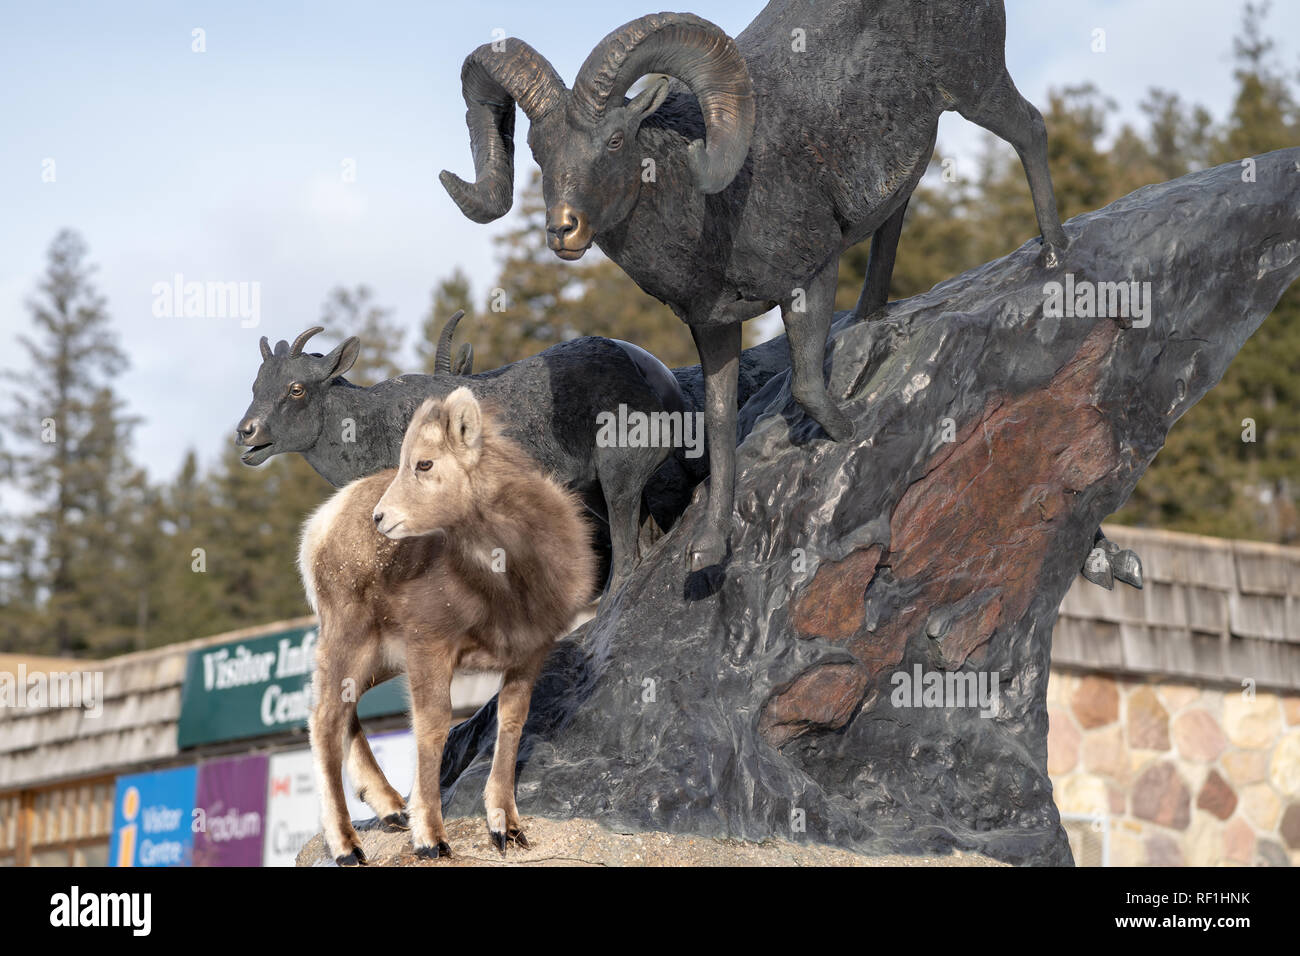 Radium Hot Springs, British Columbia, Canada - Janurary 20, 2019: Bighorn sheep baby ewe stands on top of a statue of Bighorn sheep, confused, thinkin Stock Photo